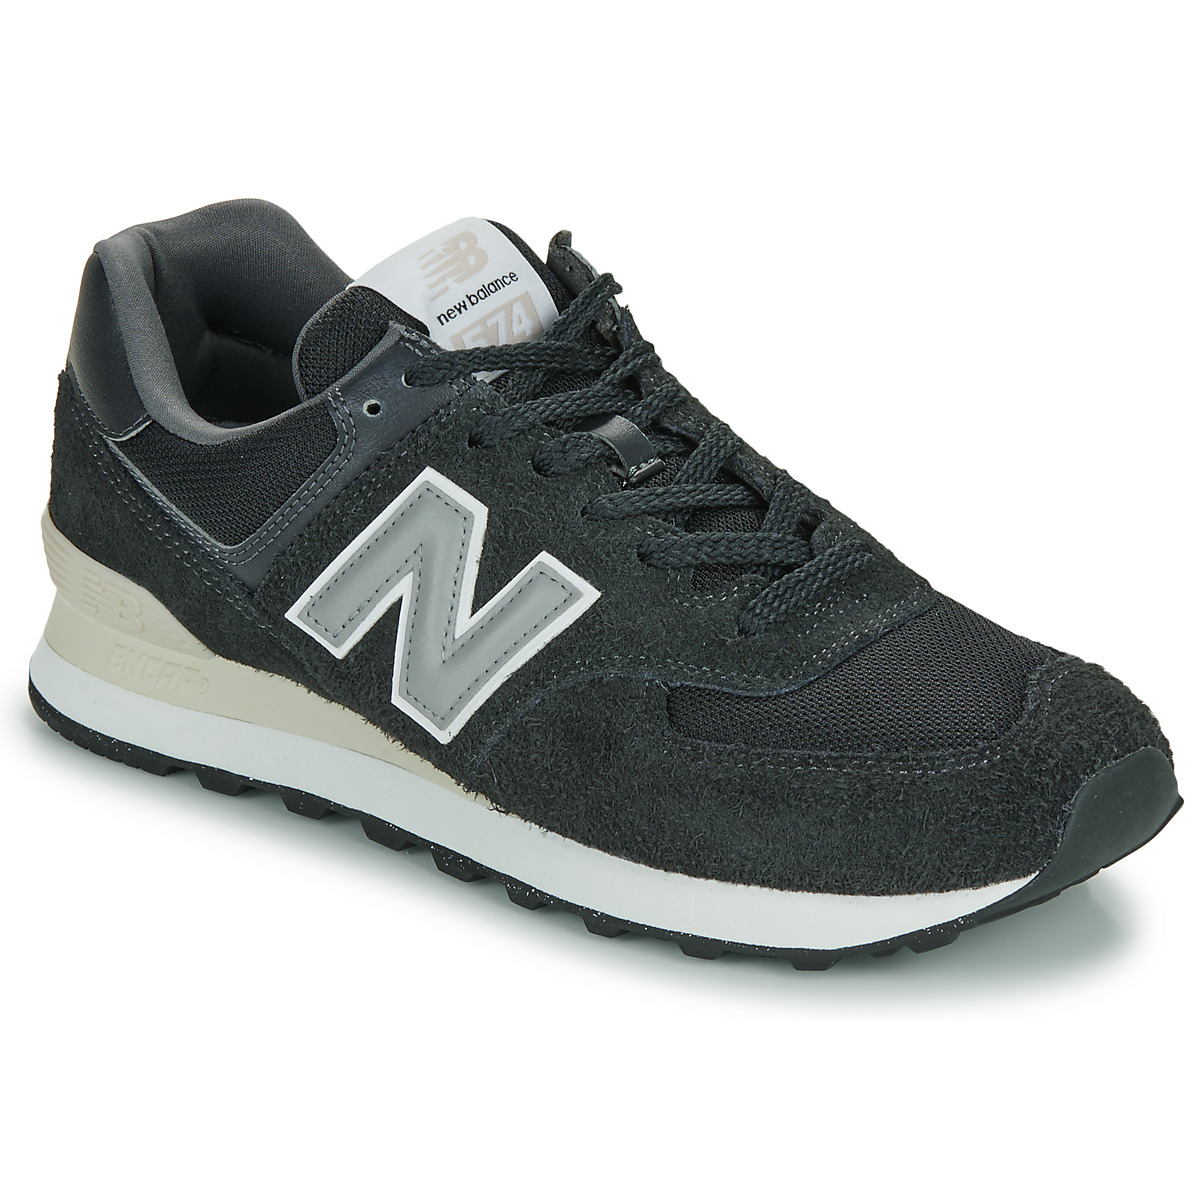 Chaussures Homme Footwear NEW BALANCE Fuelcell Propel Remix MPRMXLW Colourful Grey 574 Noir / Gris